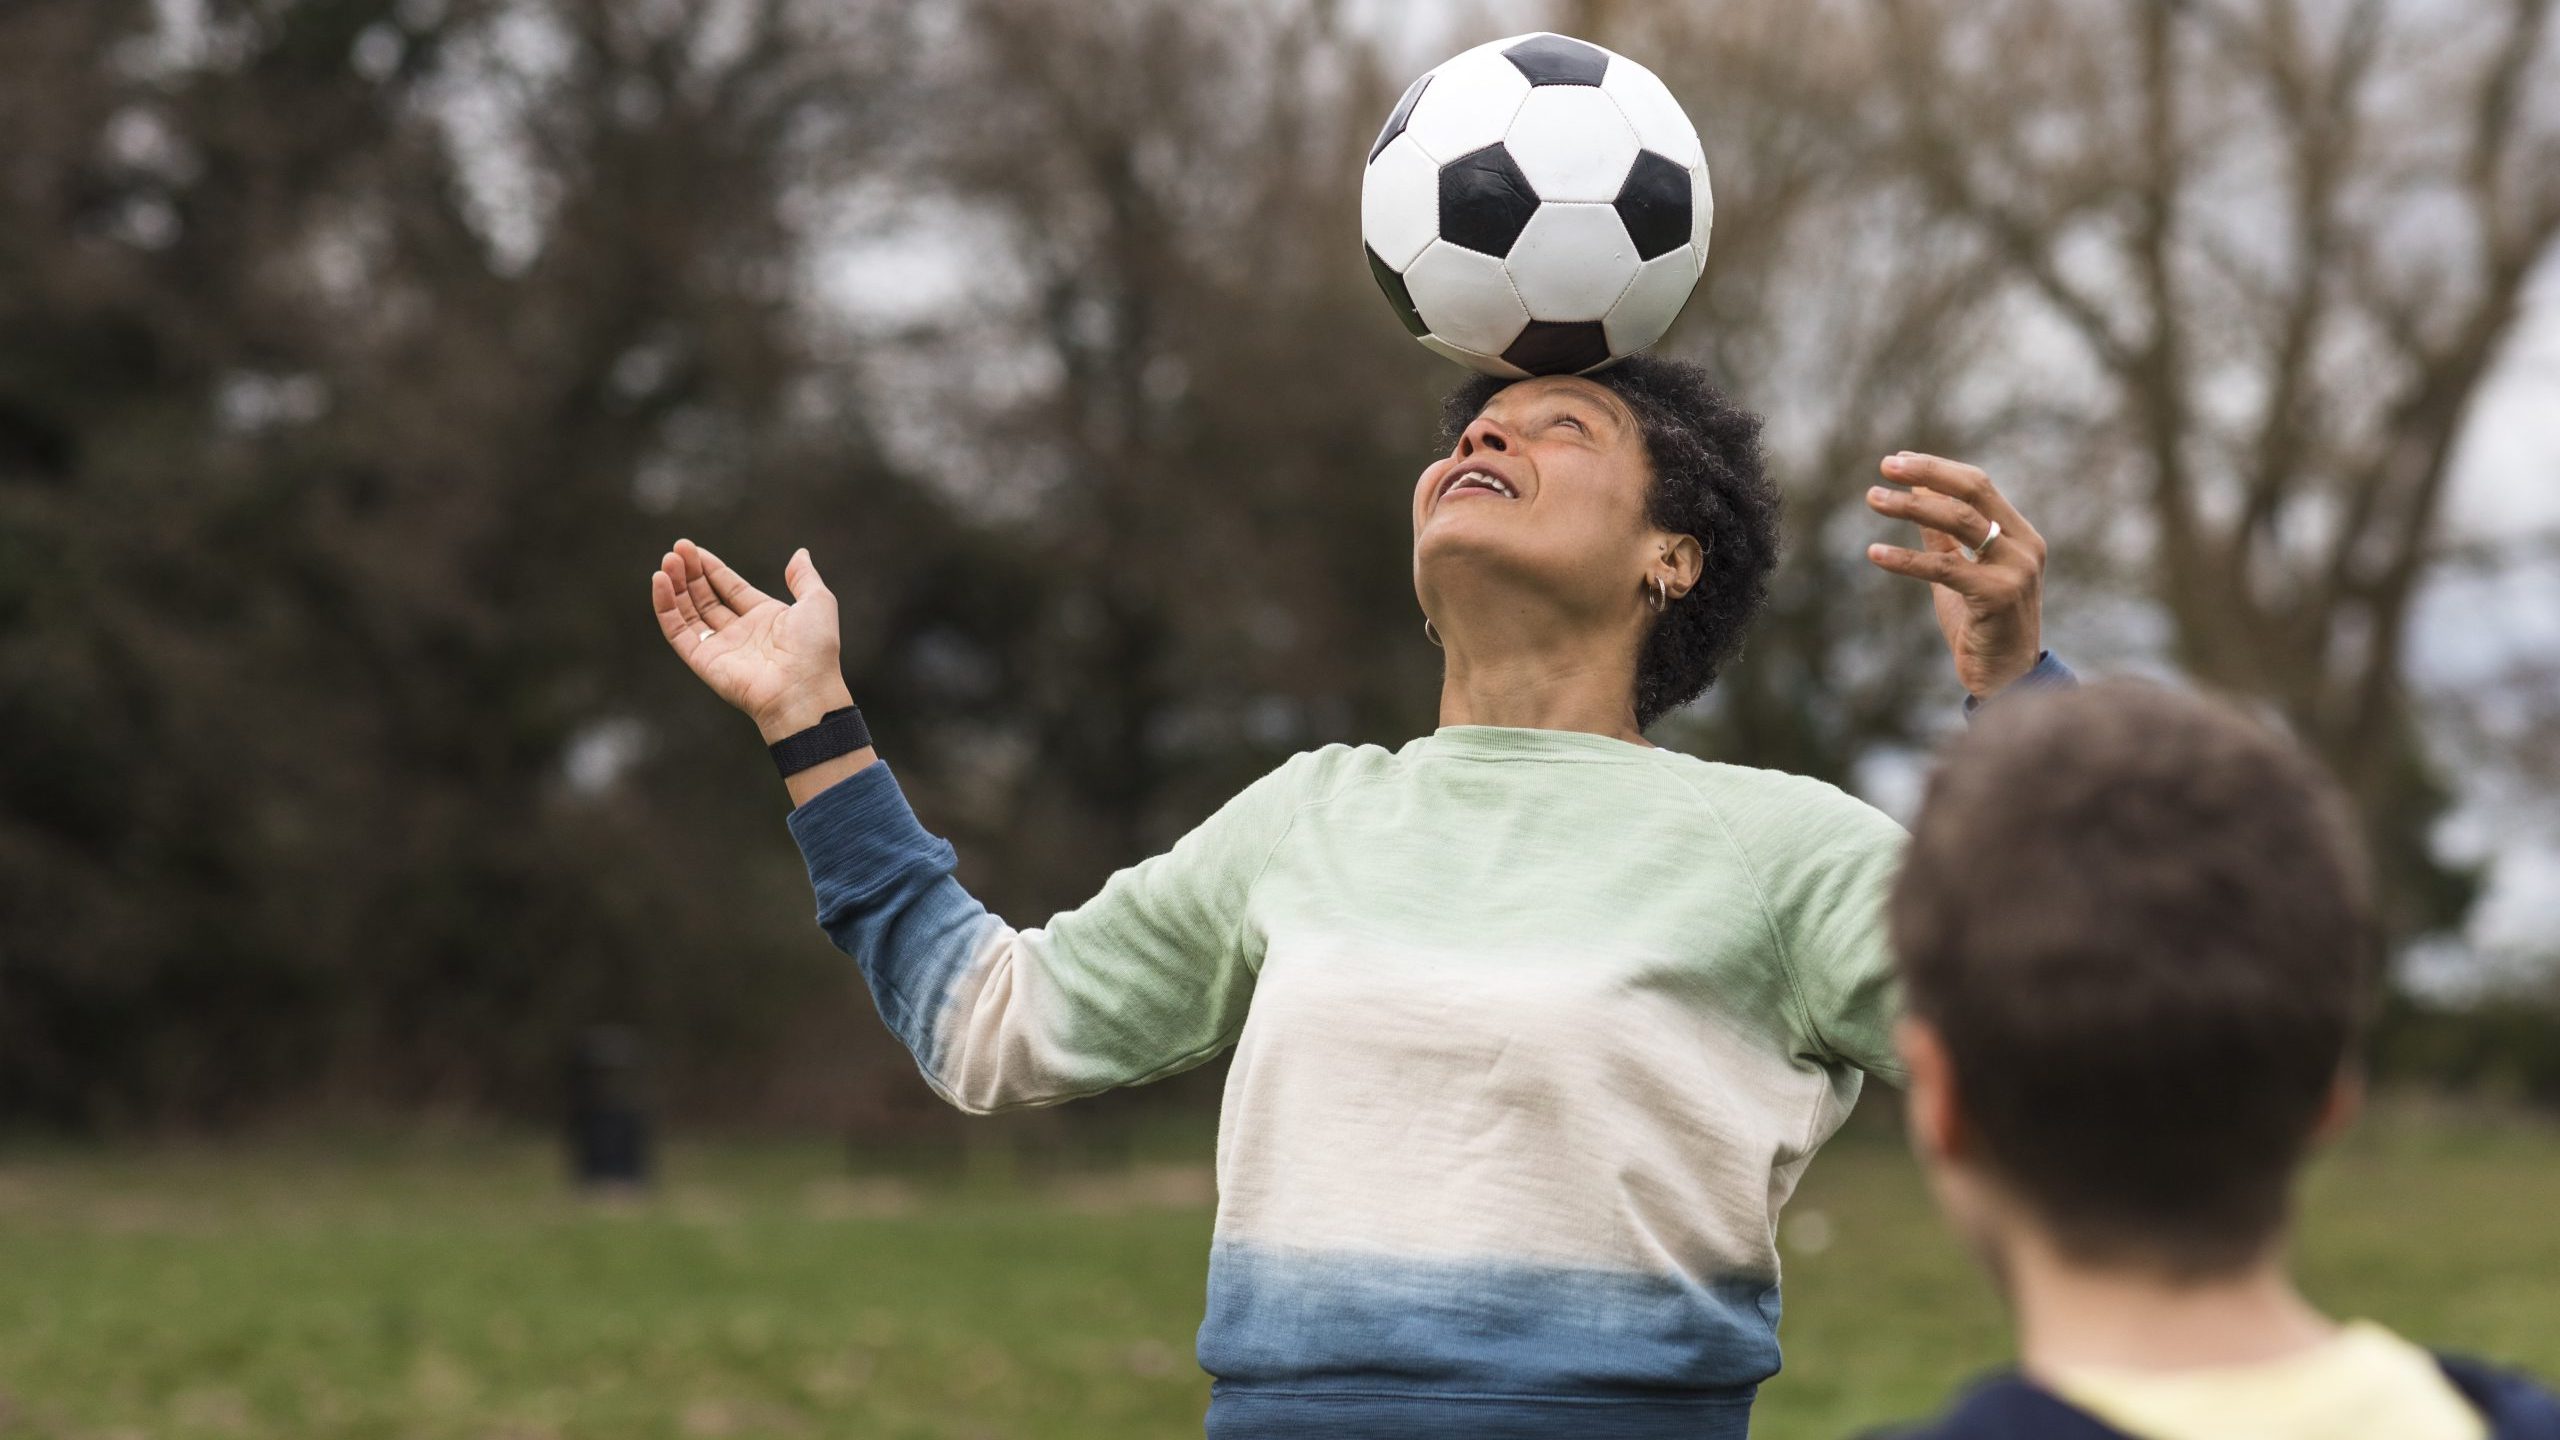 Black woman aged 45-55 playing football with her sun